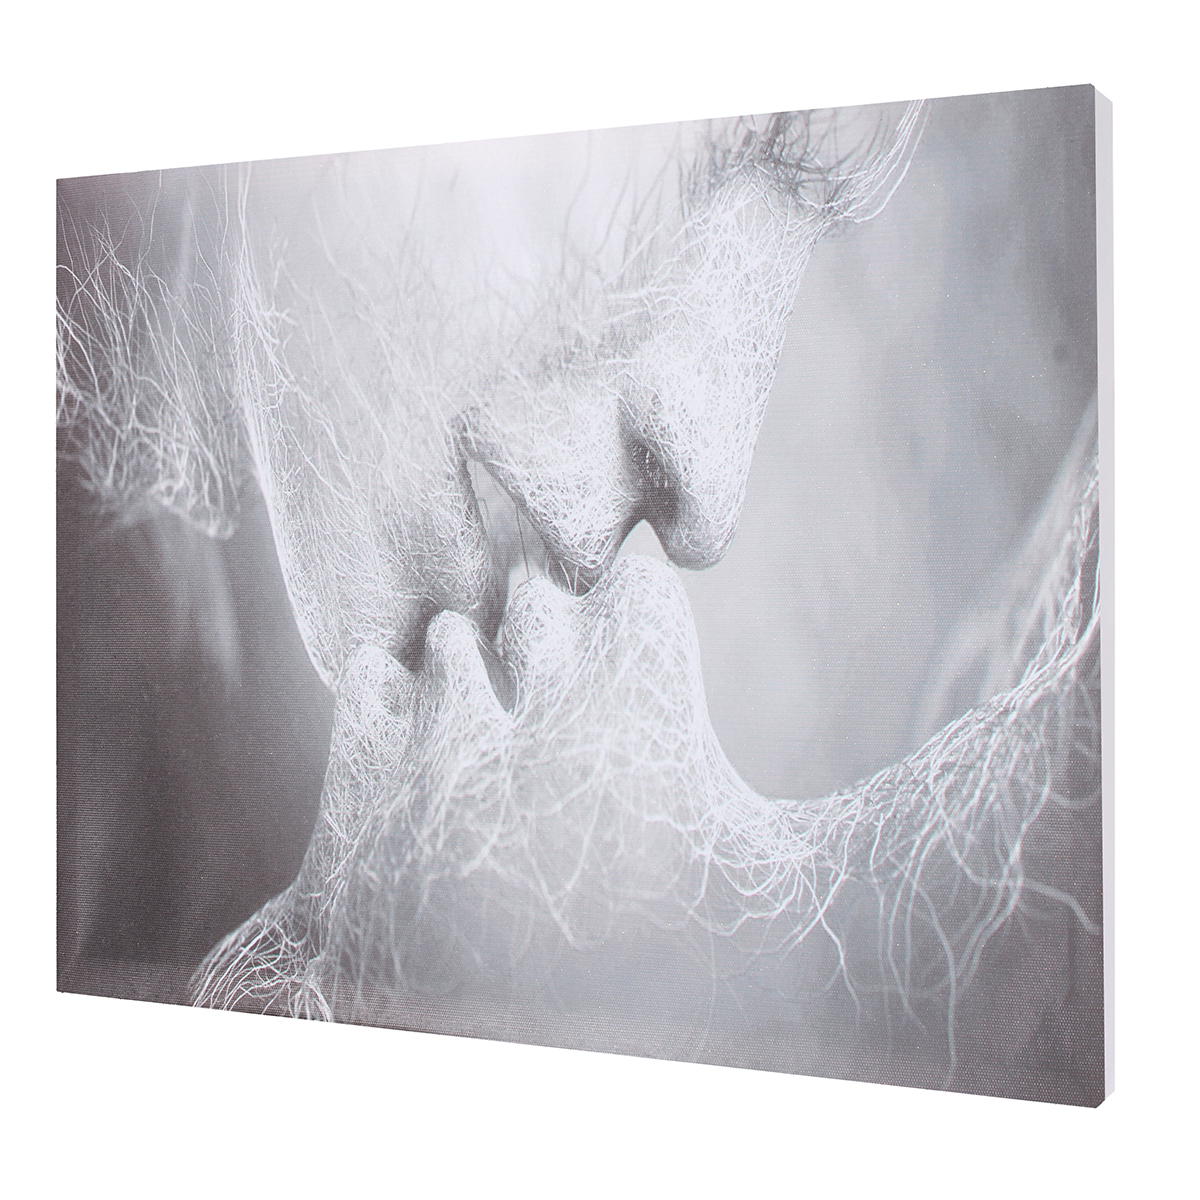 1-Piece-Love-Kiss-Abstract-Canvas-Painting-Wall-Decorative-Print-Art-Pictures-Frameless-Wall-Hanging-1733278-4